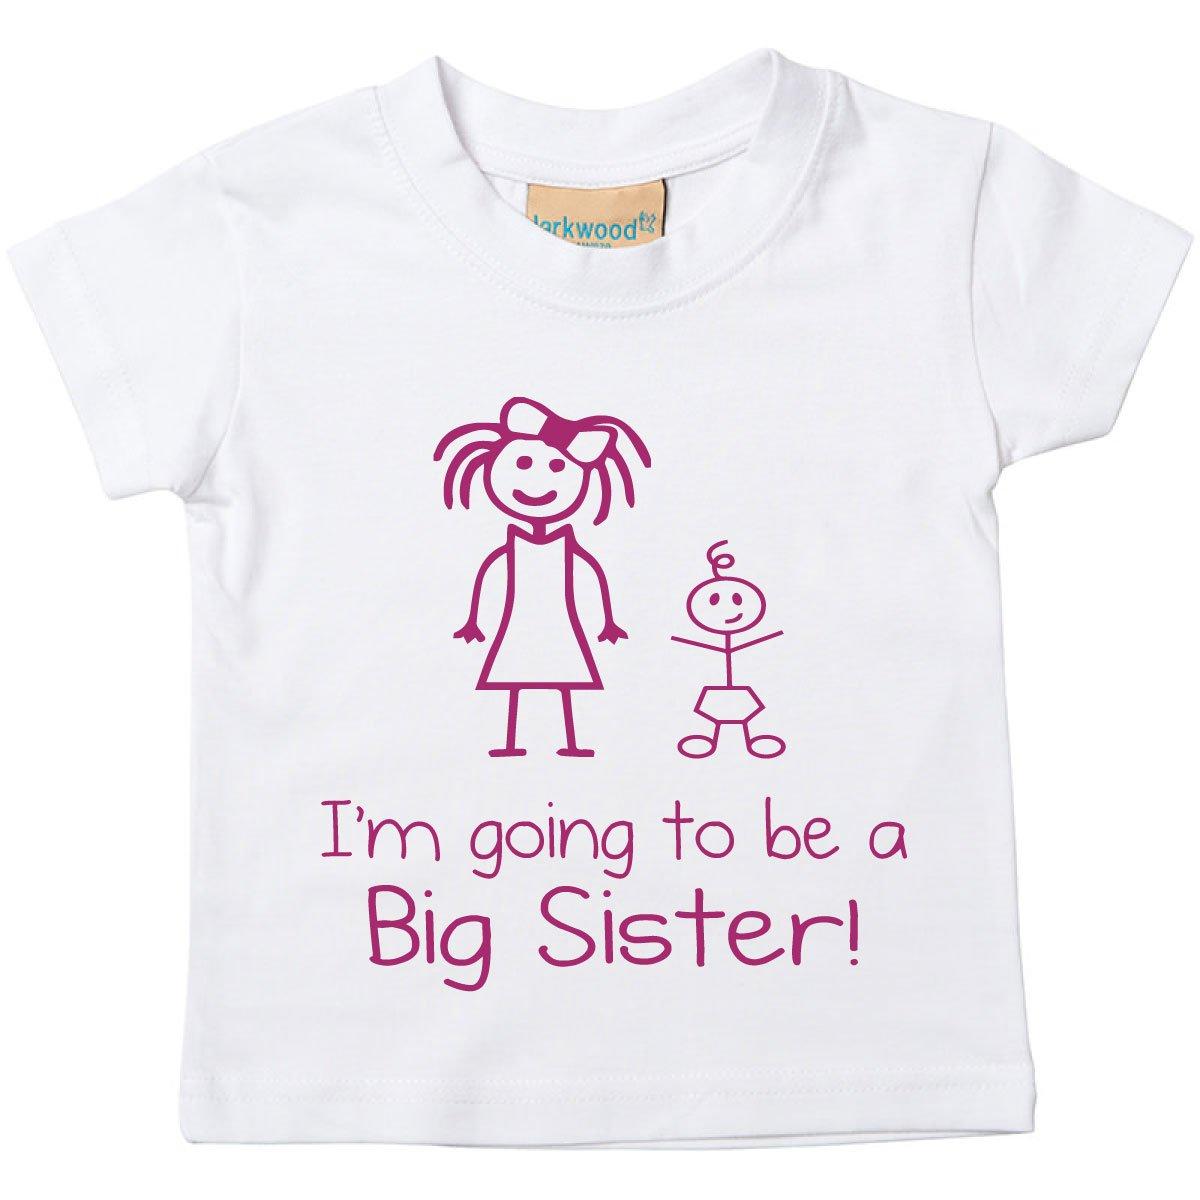 I’m Going To Be a Big Sister White Tshirt